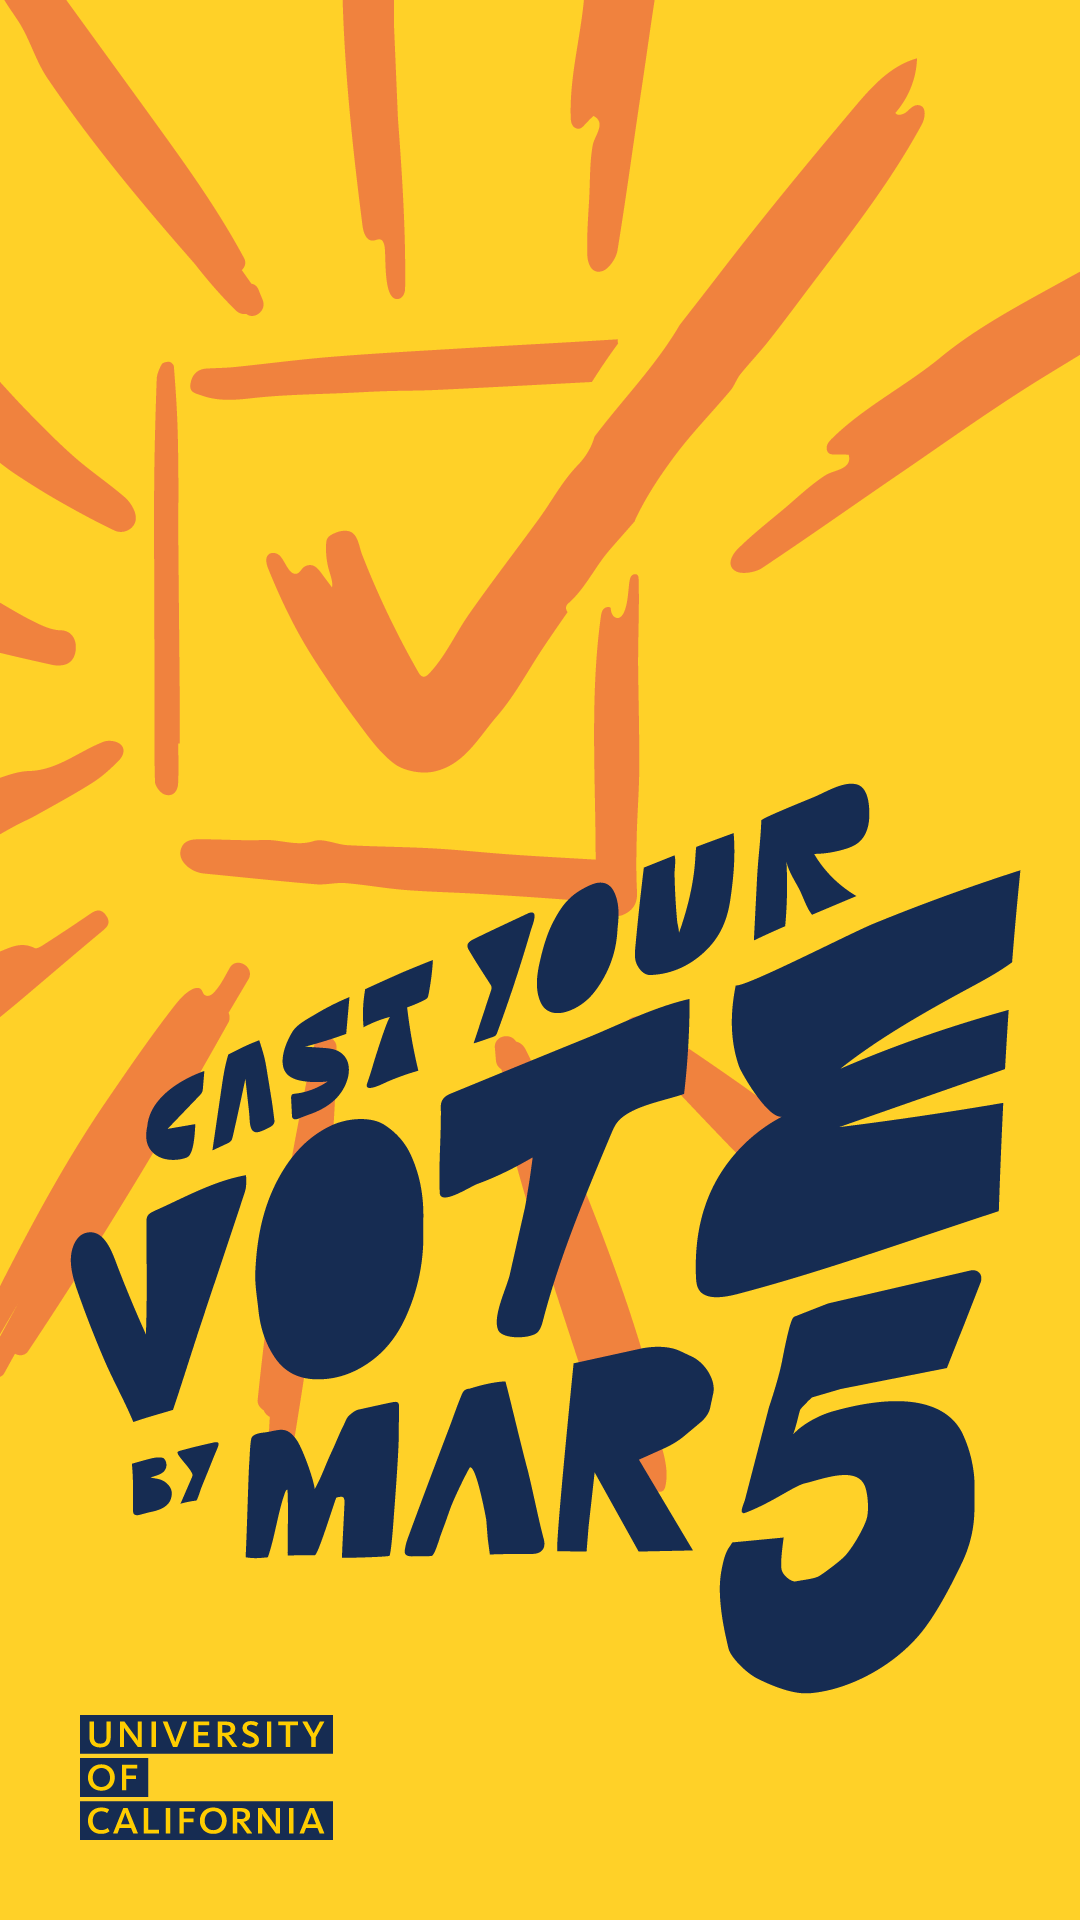 Cast  Your Vote by Mar 5 text on a bright orange and yellow graphic with a glowing checkmark